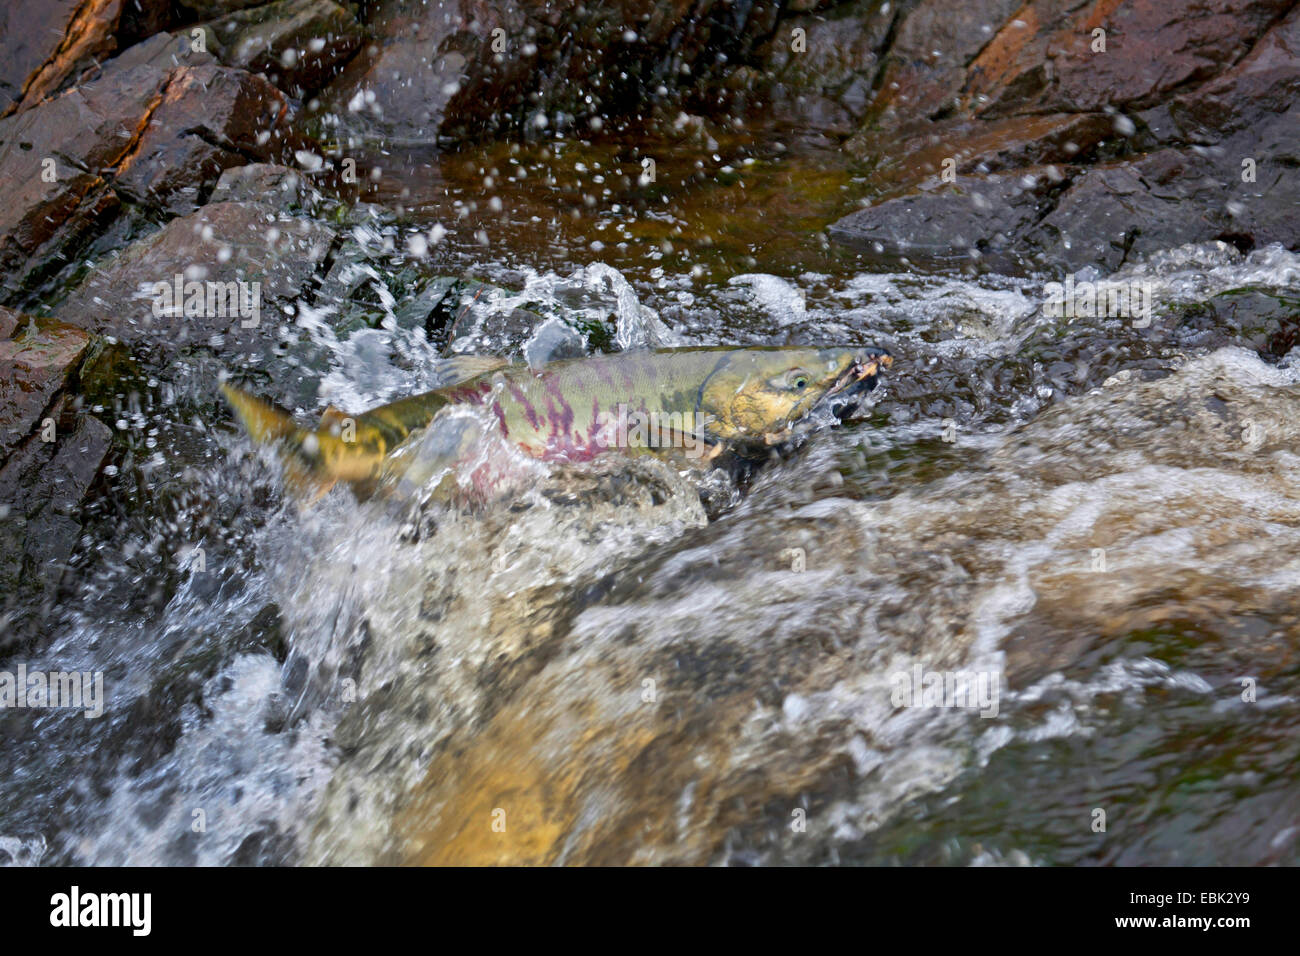 Chum Lachs (Oncorhynchus Keta), Fisch Lachs Migration in Eagle River, USA, Alaska, Tongass National Forest Stockfoto